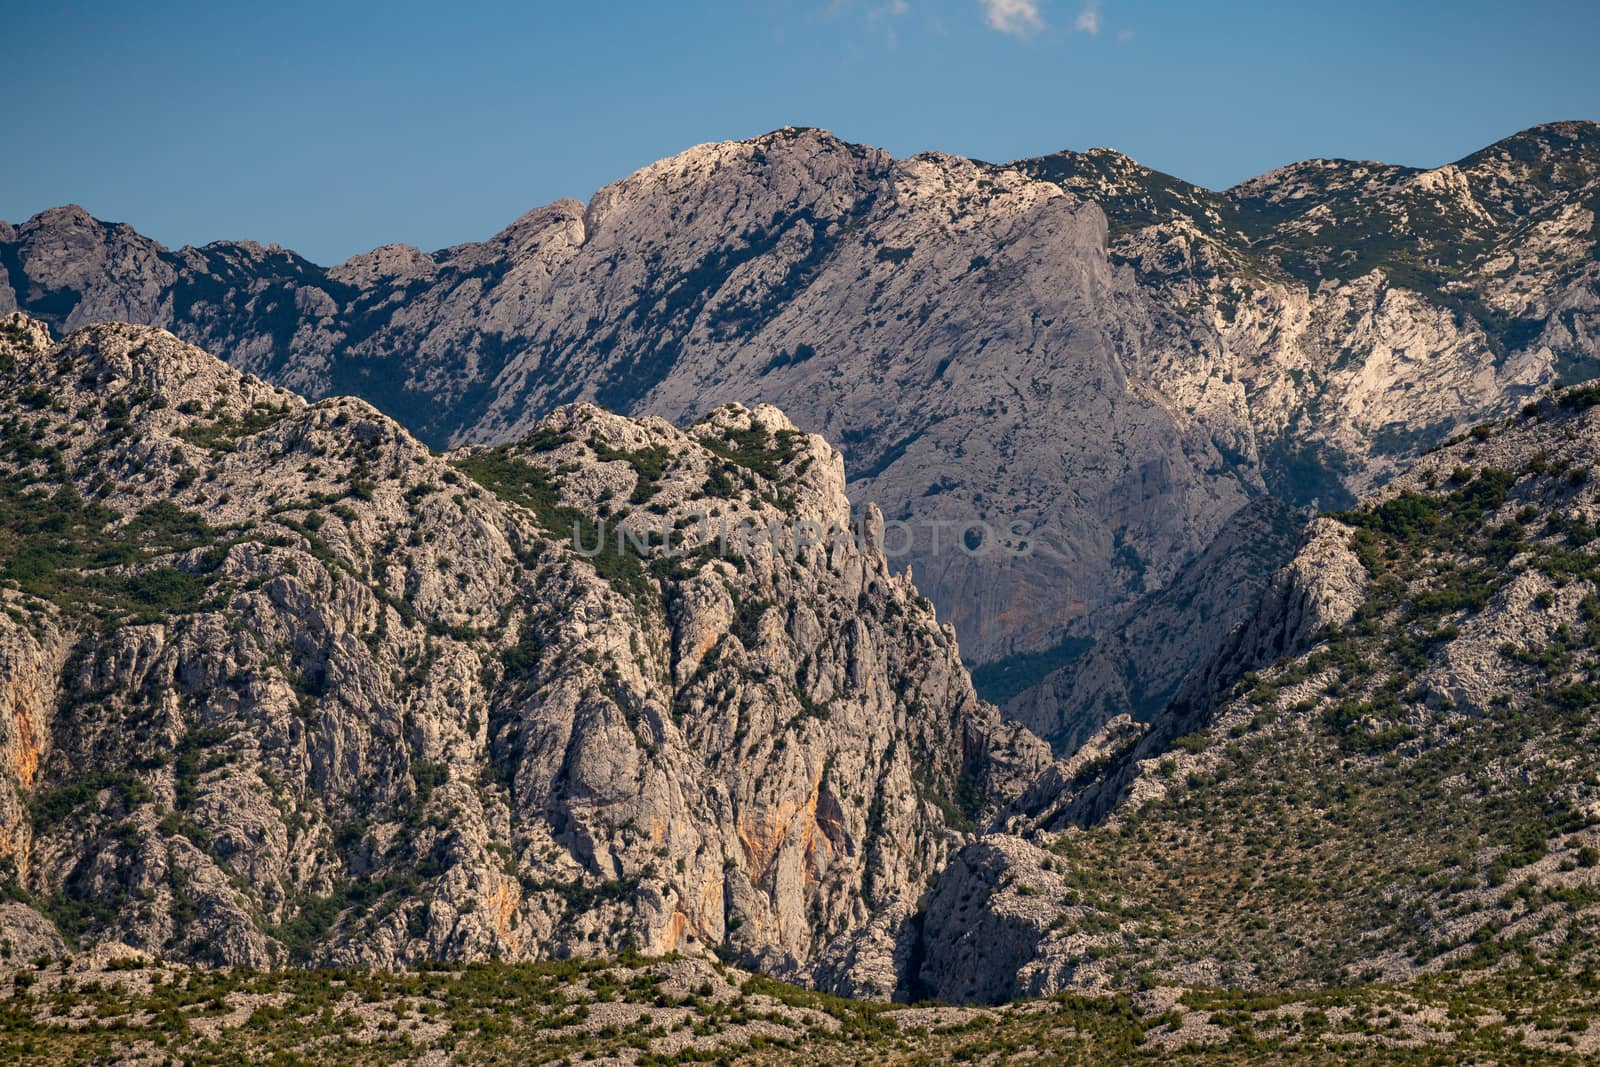 Extreme mountains in Paklenica National Park, Velebit, are popular place for hiking and climbing tourism in Croatia. Paklenica offers scenic landscapes in pristine environment. Desserted landscape concept, copyspace